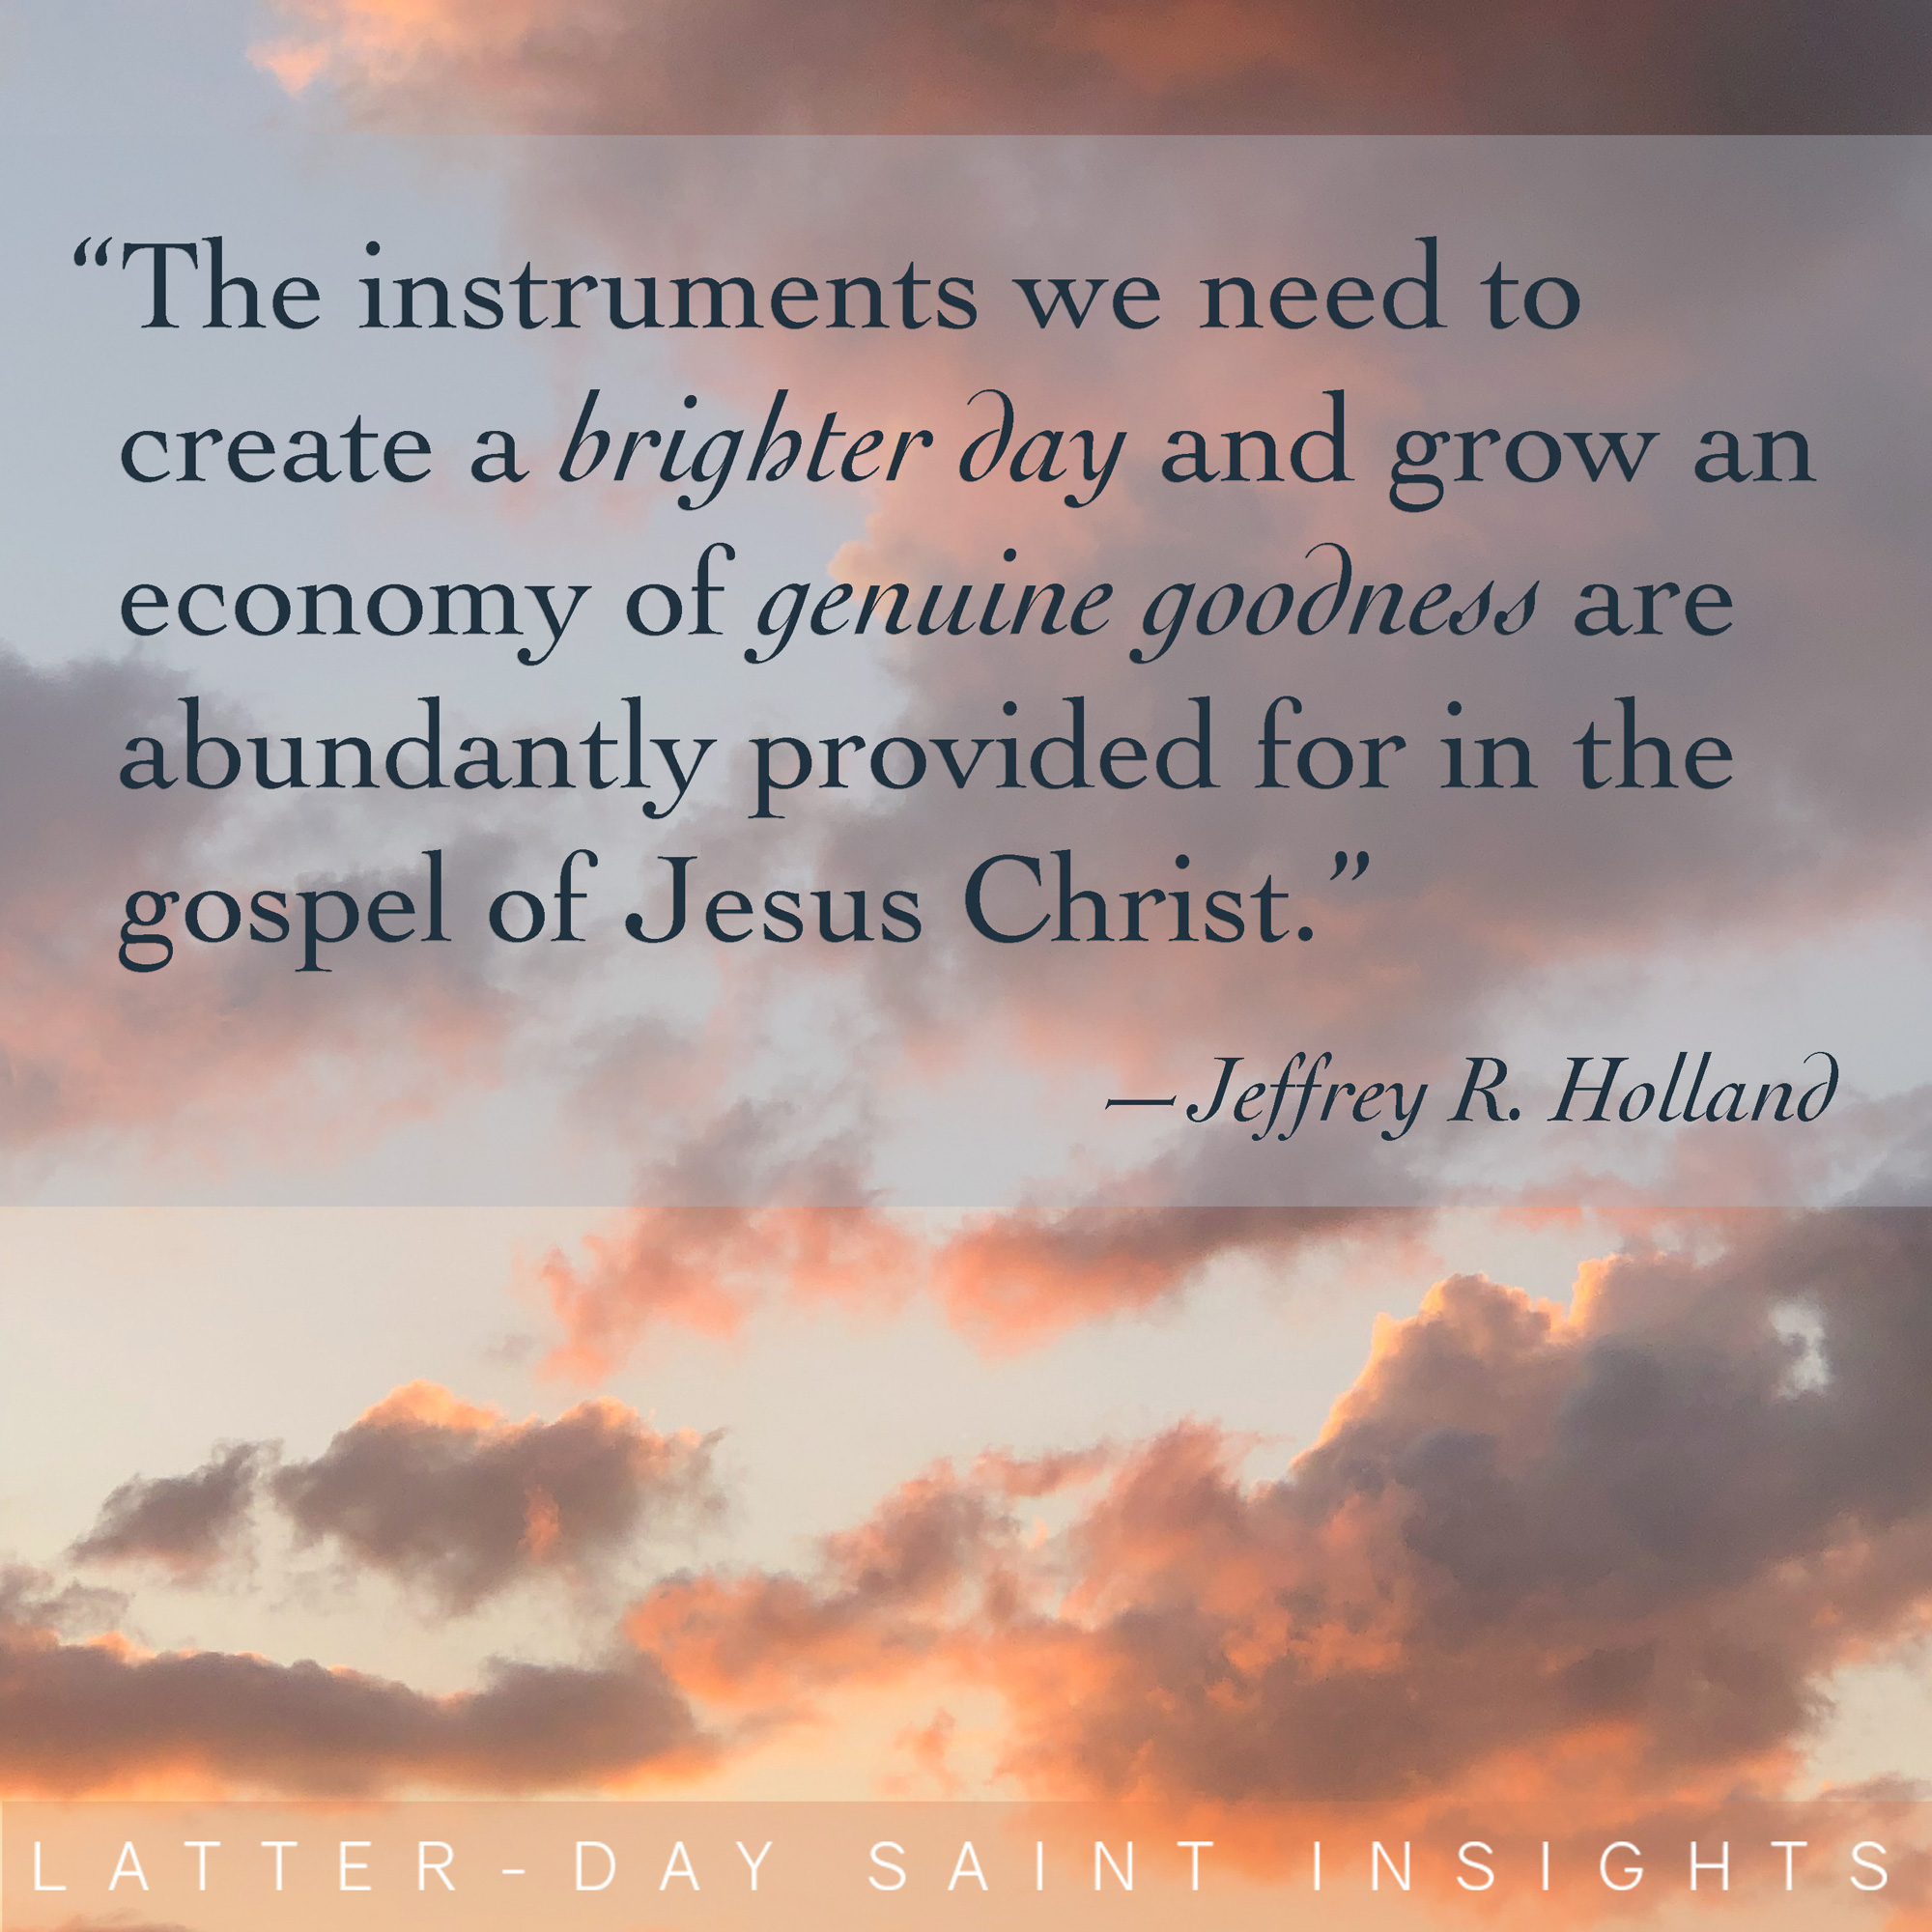 The instruments we need to create a brighter day and grow an economy of genuine goodness are abundantly provided for in the gospel of Jesus Christ. -Jeffrey R. Holland